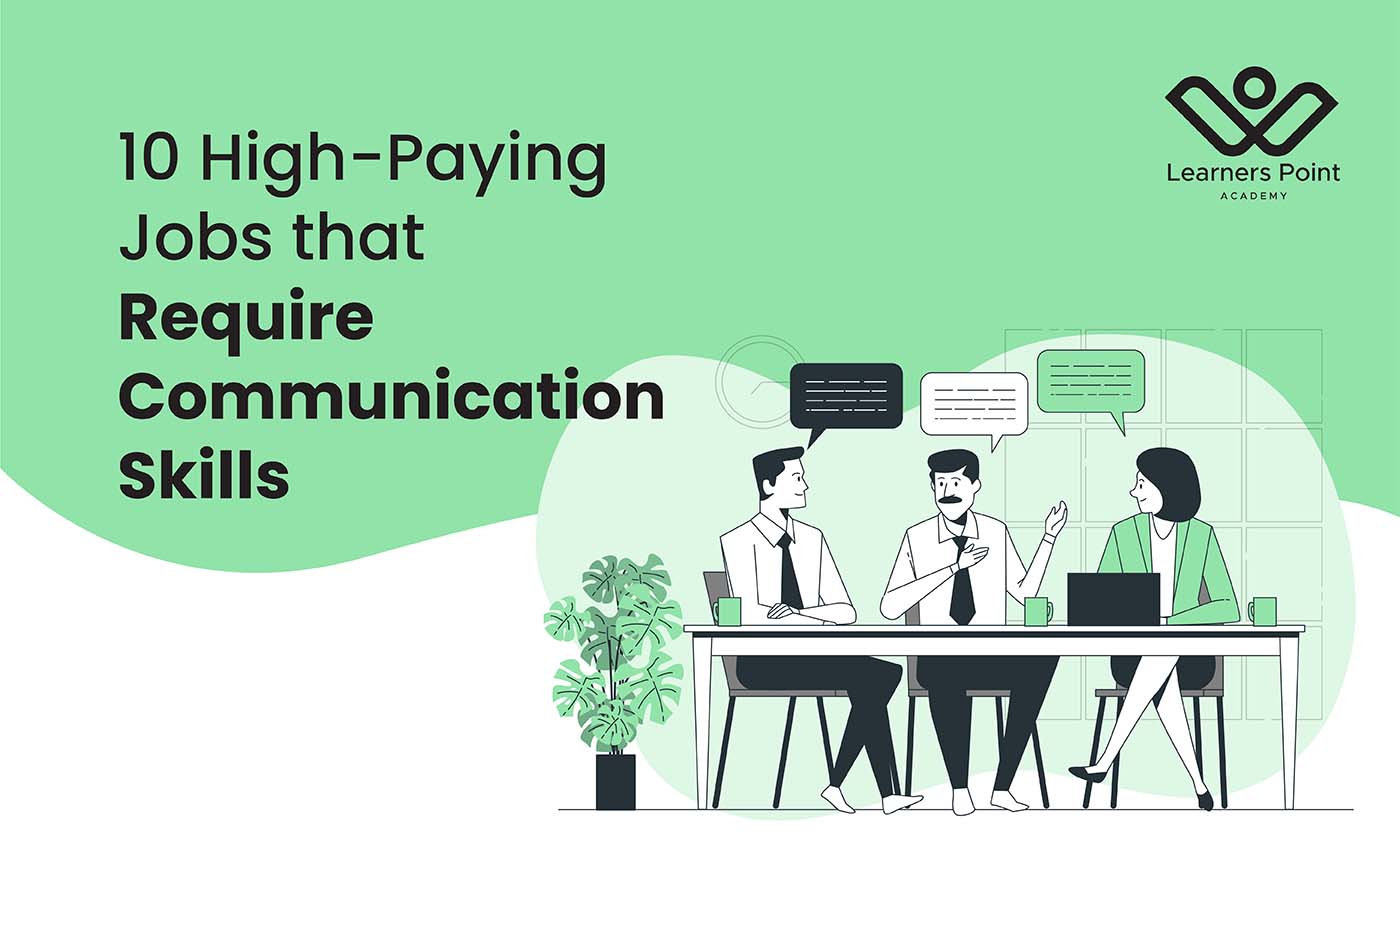 10 High-Paying Jobs that Require Communication Skills